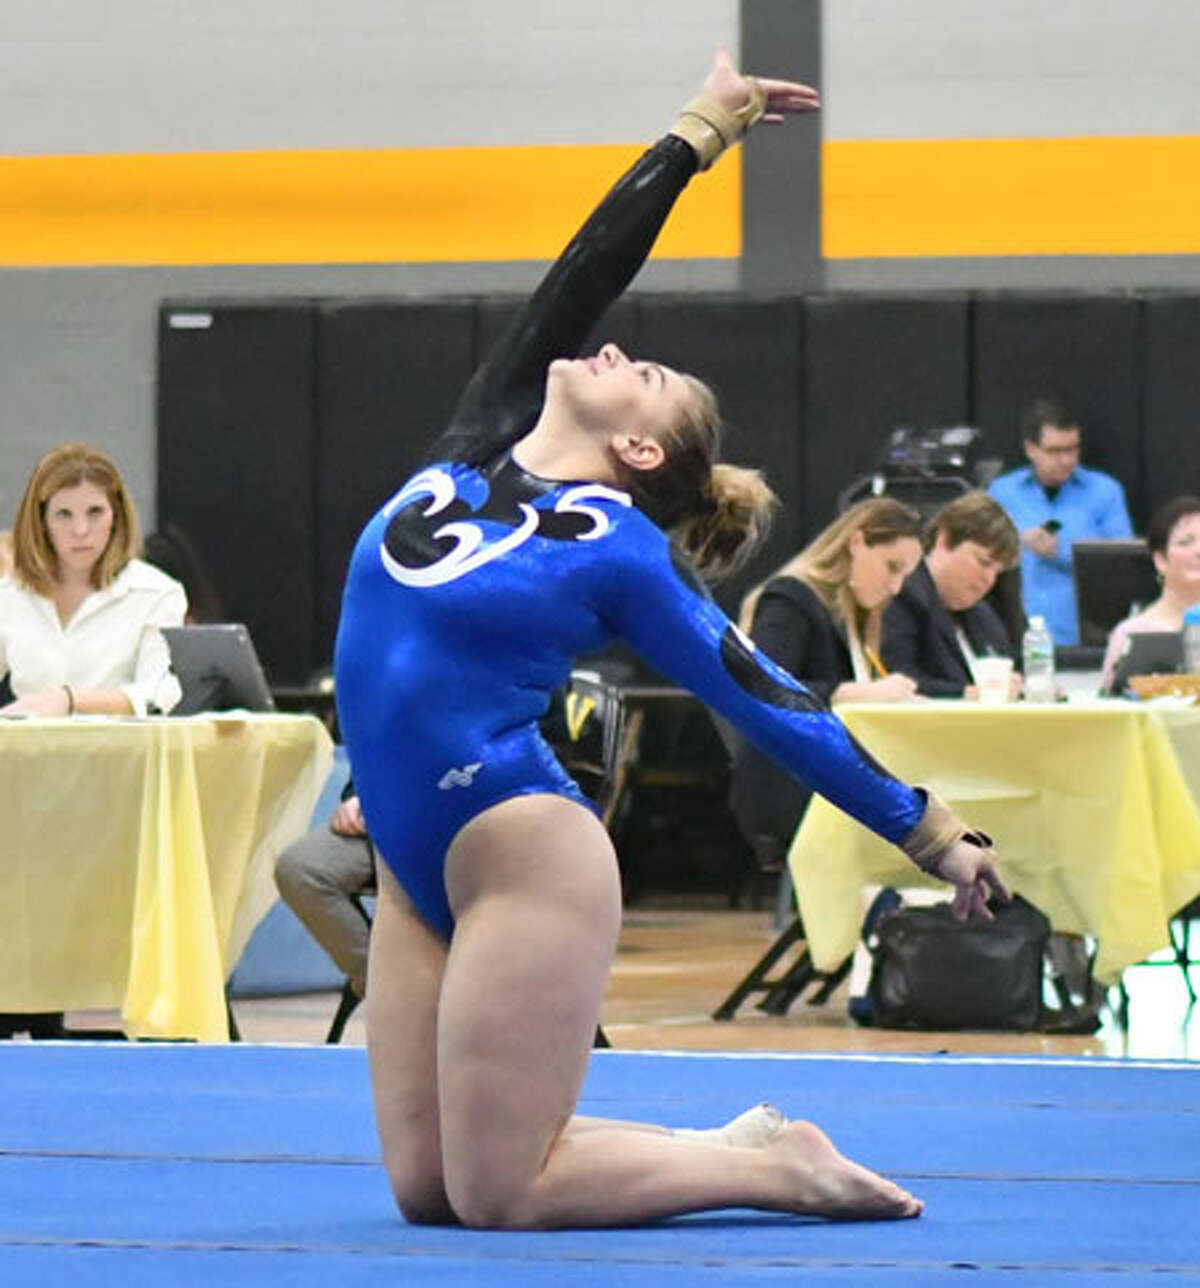 Nicole Carlo of the Darien Blue Wave competes in the floor exercise during the CIAC Class M Gymnastics Championships on Saturday February 23, 2019 at Jonathan Law High School in Milford, Connecticut. — Greg Vasil/For Hearst Connecticut Media